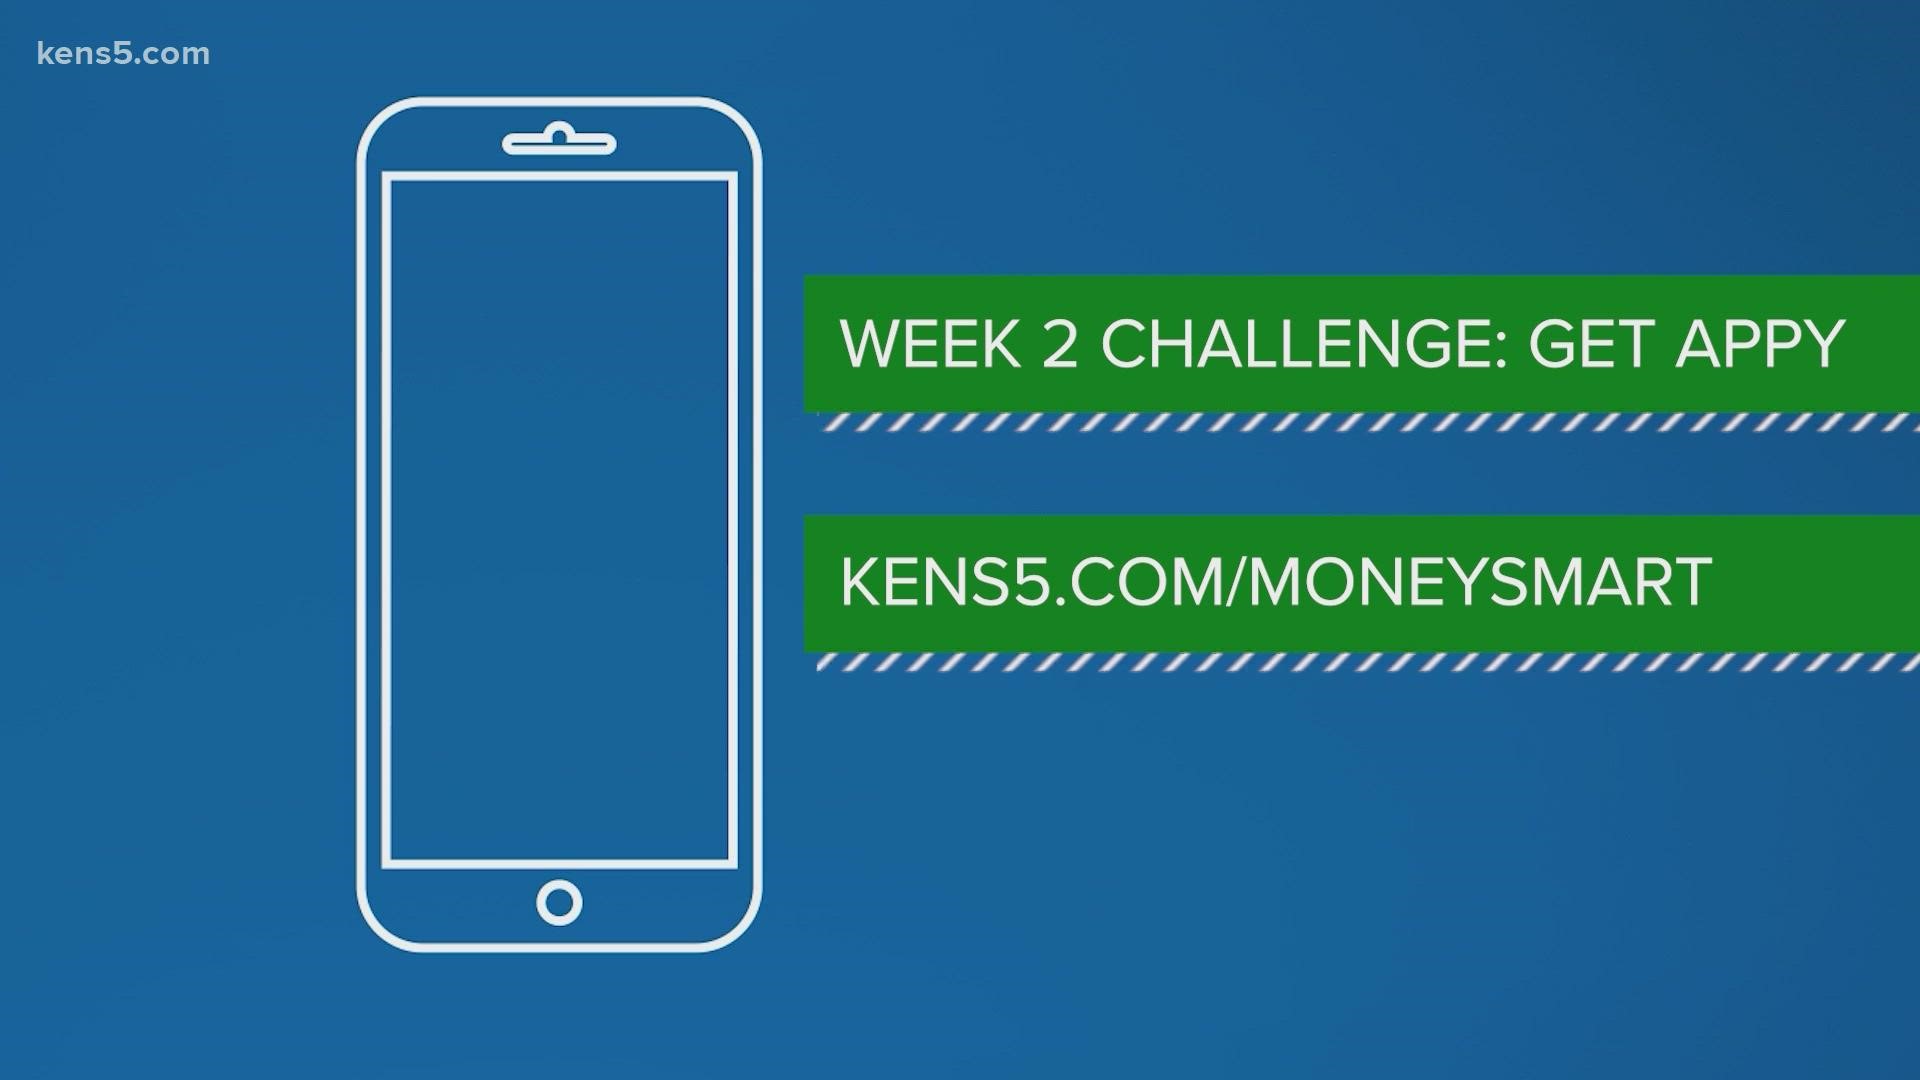 Here are 3 ways to organize your emails in this week's money smart challenge.